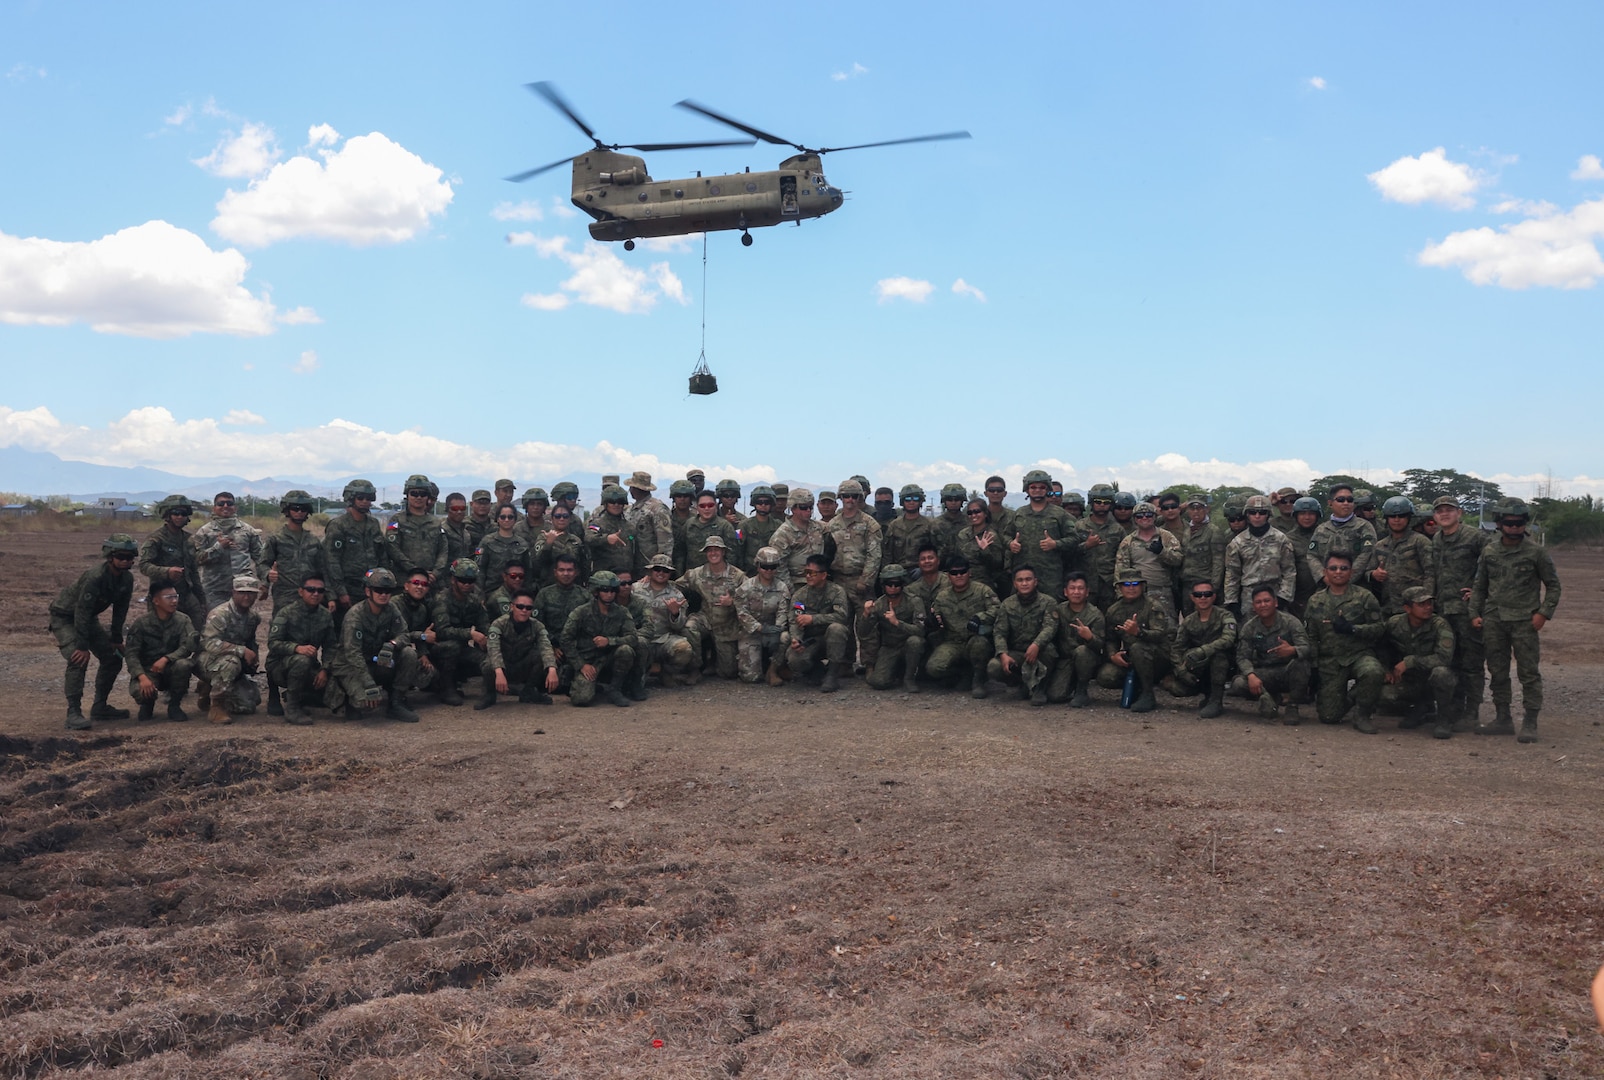 U.S. Army Soldiers from the 25th Infantry Division Sustainment Brigade, 25th Infantry Division, alongside Philippine Army Soldiers from the 7th Service Support Battalion, Army Support Command, and Special Forces Regiment Airborne pose for a group photo following a sling load operations training activity in support of Exercise Balikatan 24 at Fort Magsaysay, Philippines, April 22, 2024. BK 24 is an annual exercise between the Armed Forces of the Philippines and the U.S. military designed to strengthen bilateral interoperability, capabilities, trust, and cooperation built over decades of shared experiences. (U.S. Army Photo by Spc. Kai Rodriguez, 28th Public Affairs Detachment